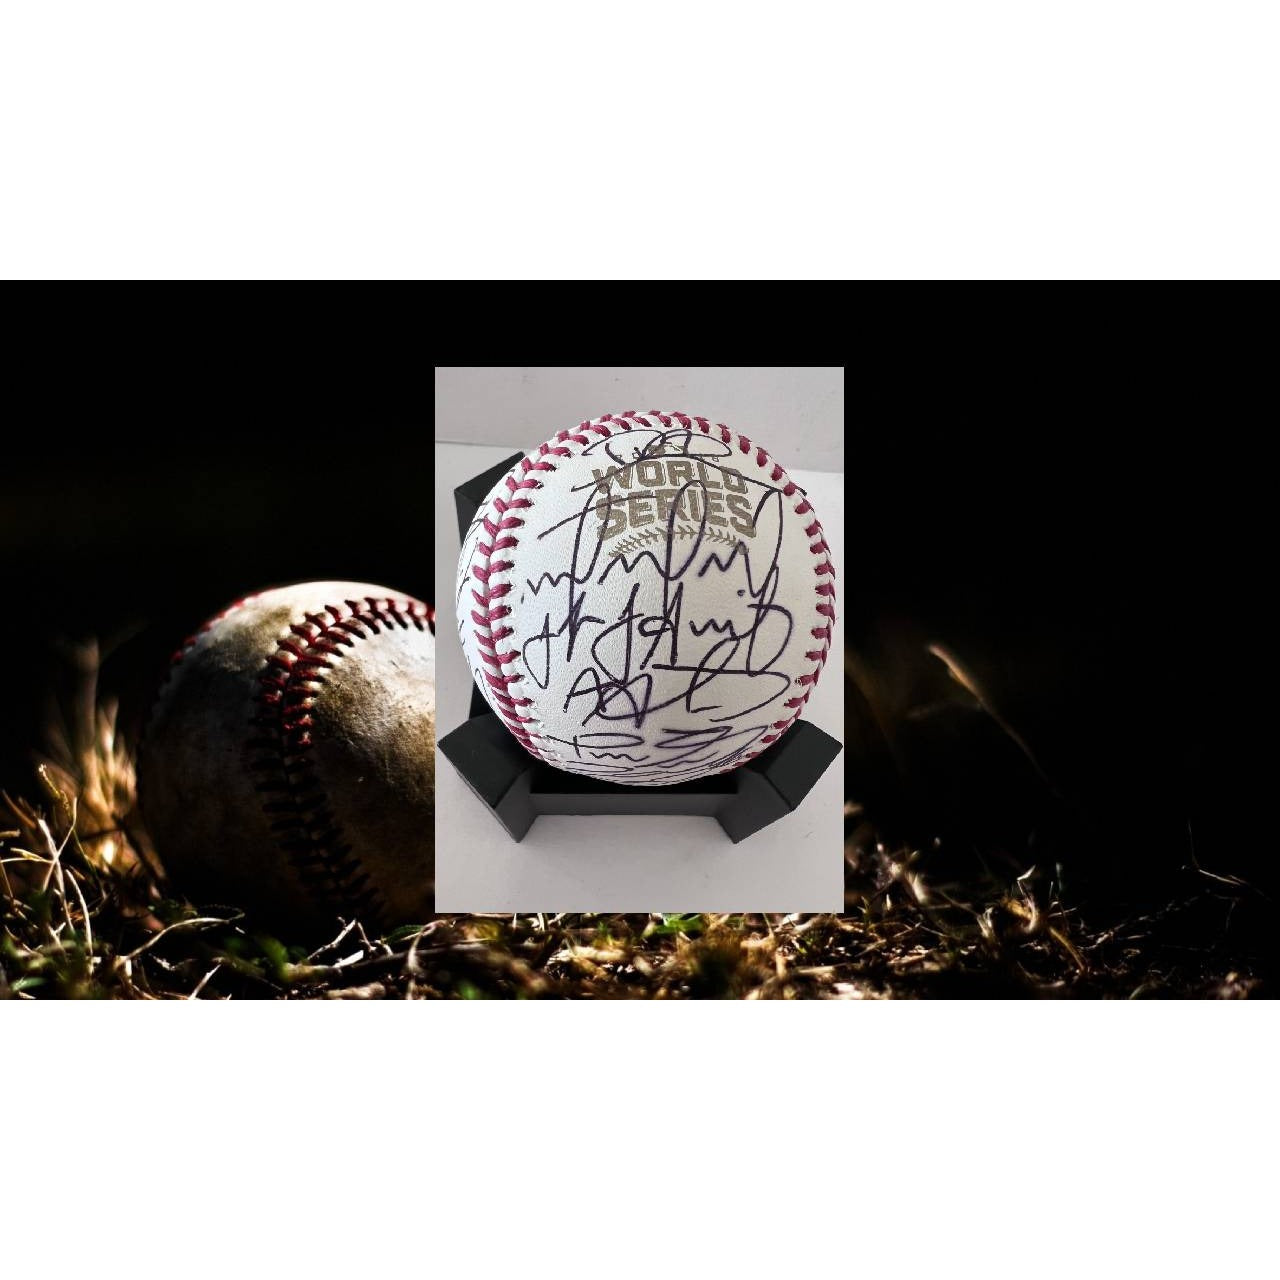 Chicago Cubs Anthony Rizzo 2016 World Series champions team signed Rawlings commemorative baseball with proof